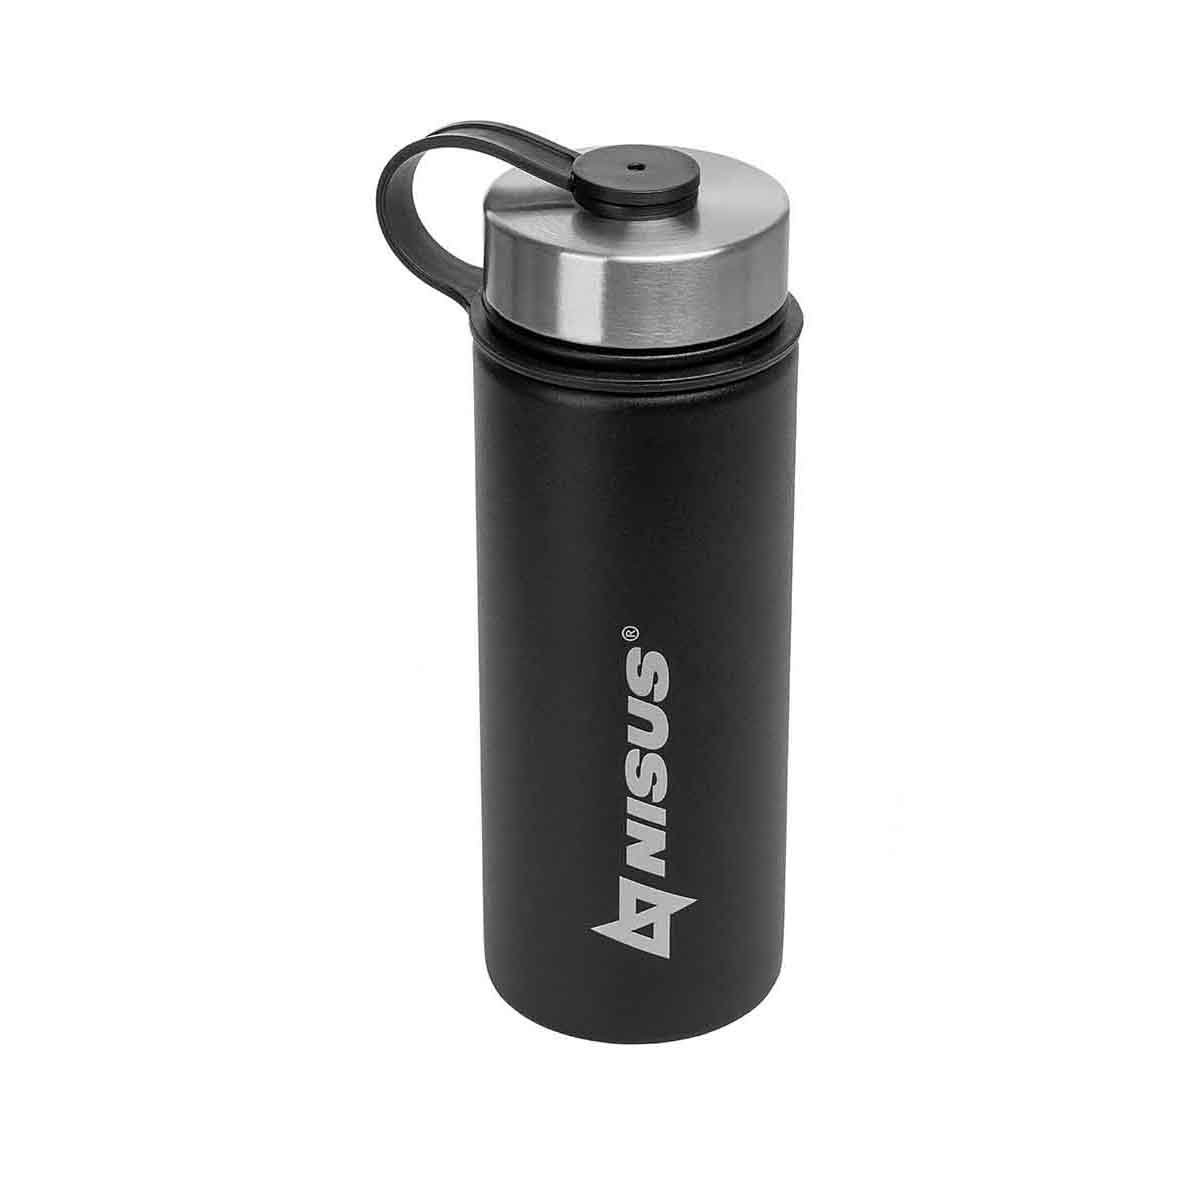 Stainless Steel Insulated Sport Water Bottle with 3 Lid Types, 18 oz, Black